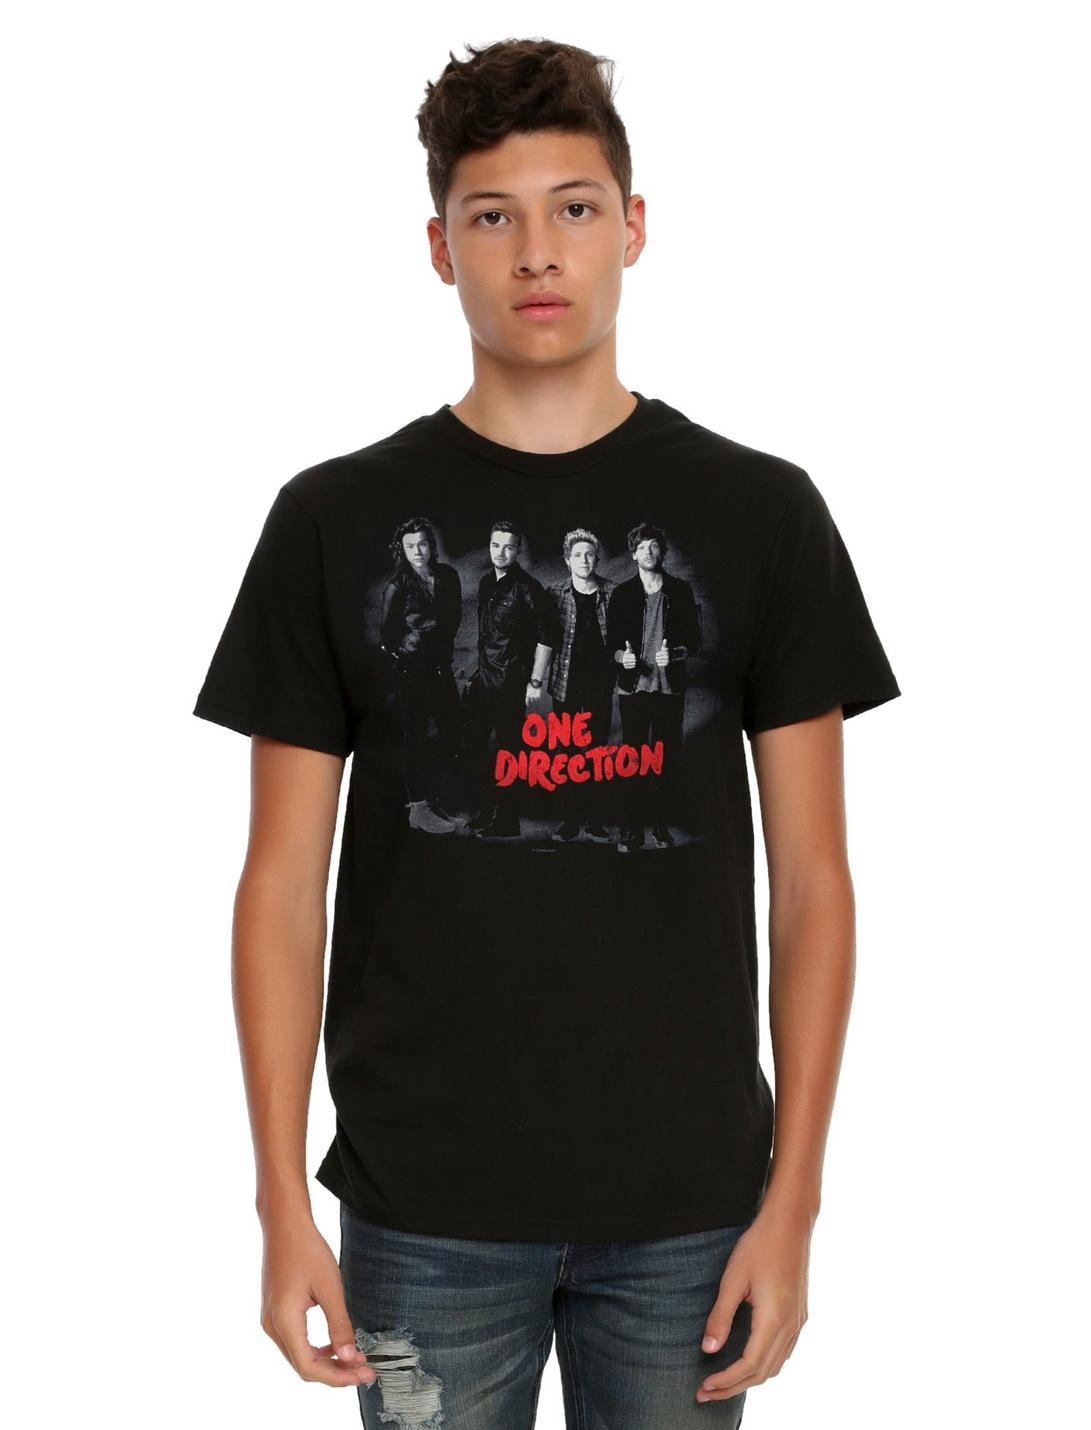 One Direction Group Photo T-Shirt, BLACK, hi-res